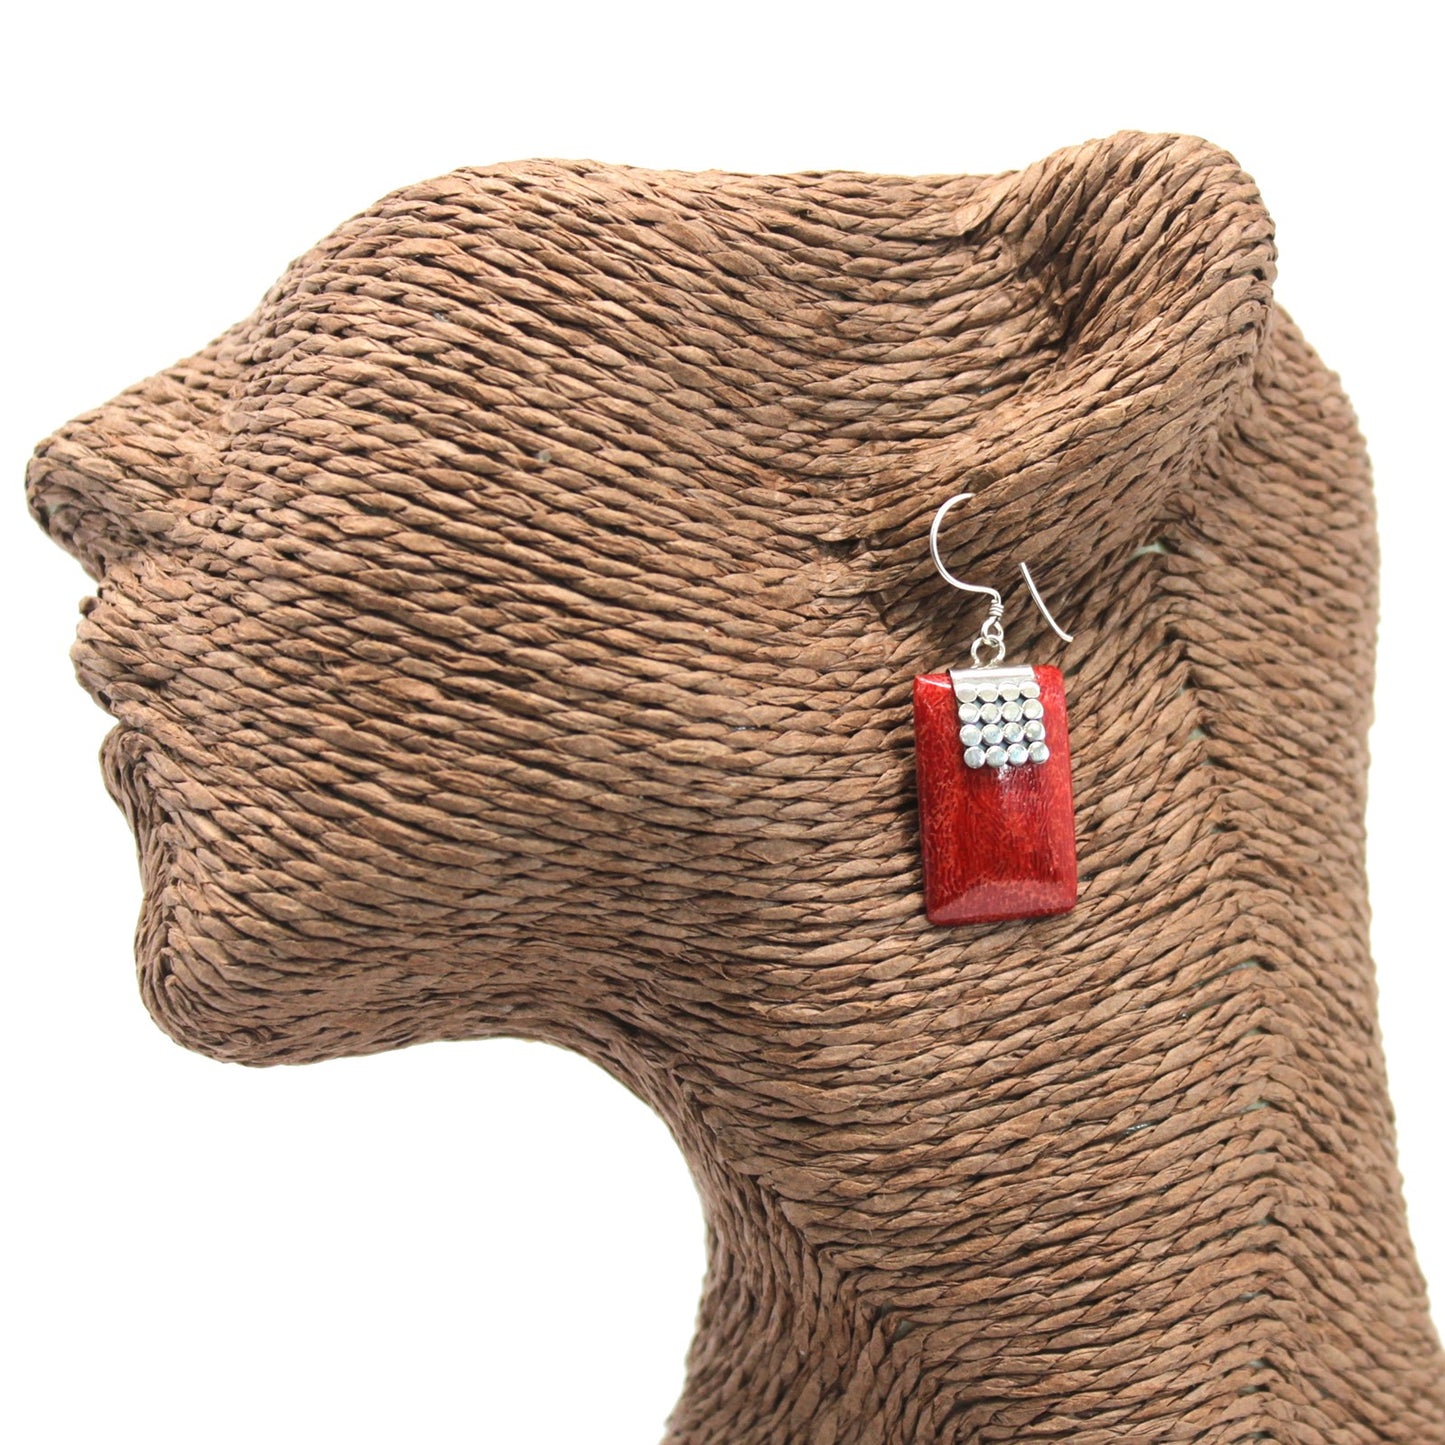 SQ Mini Discs - Red Coral Imitation 925 Silver Earings